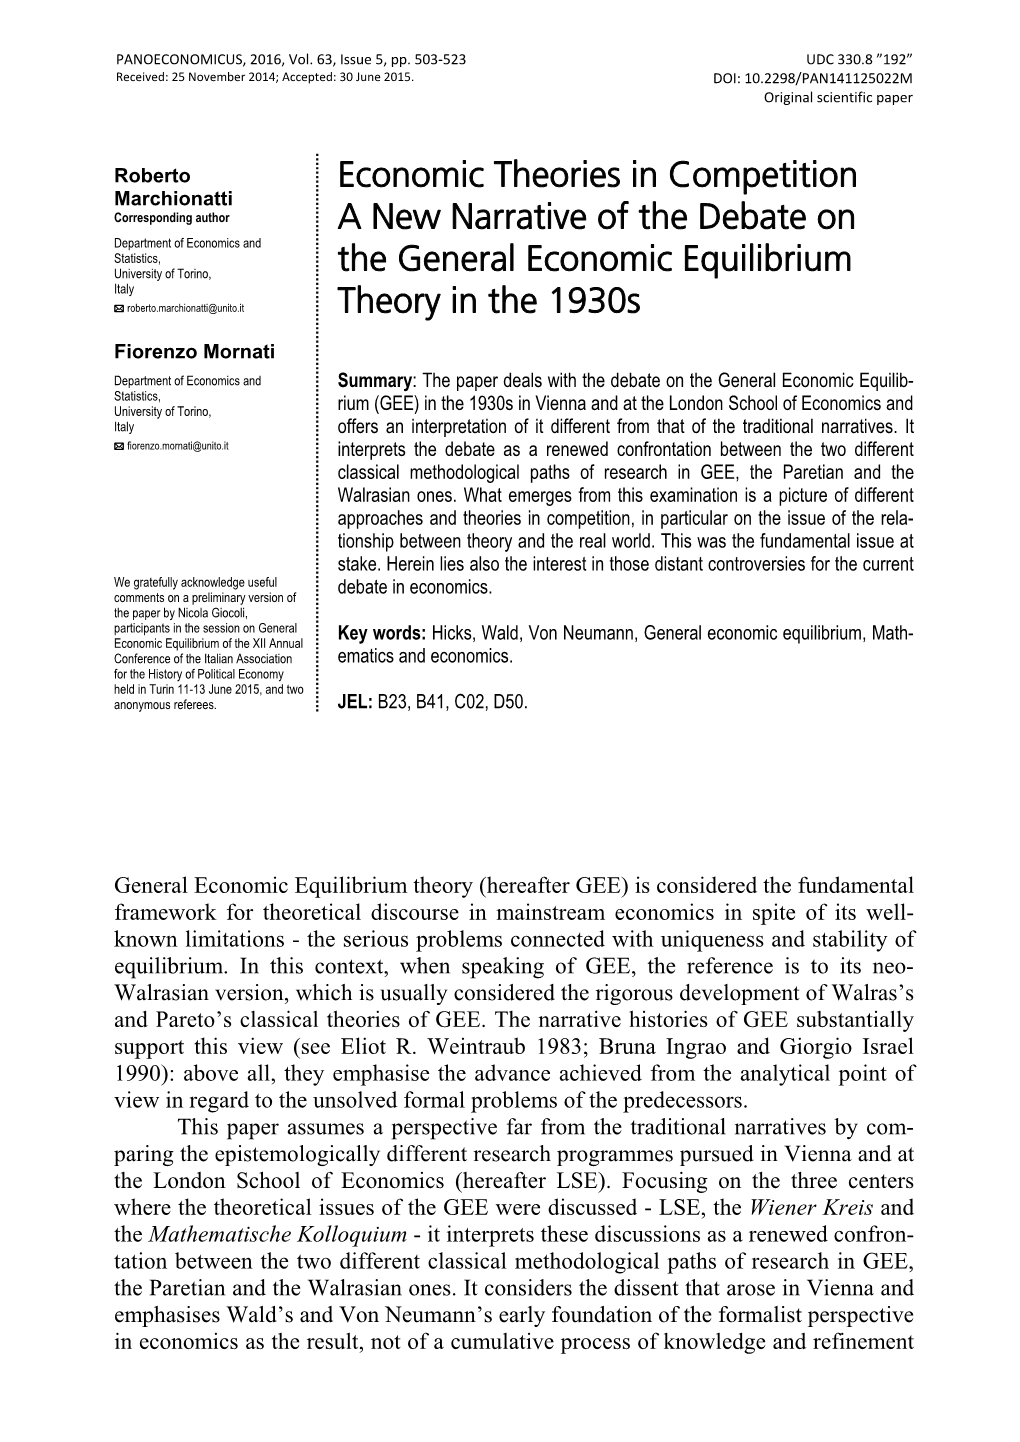 Economic Theories in Competition a New Narrative of the Debate on the General Economic Equilibrium Theory in the 1930S